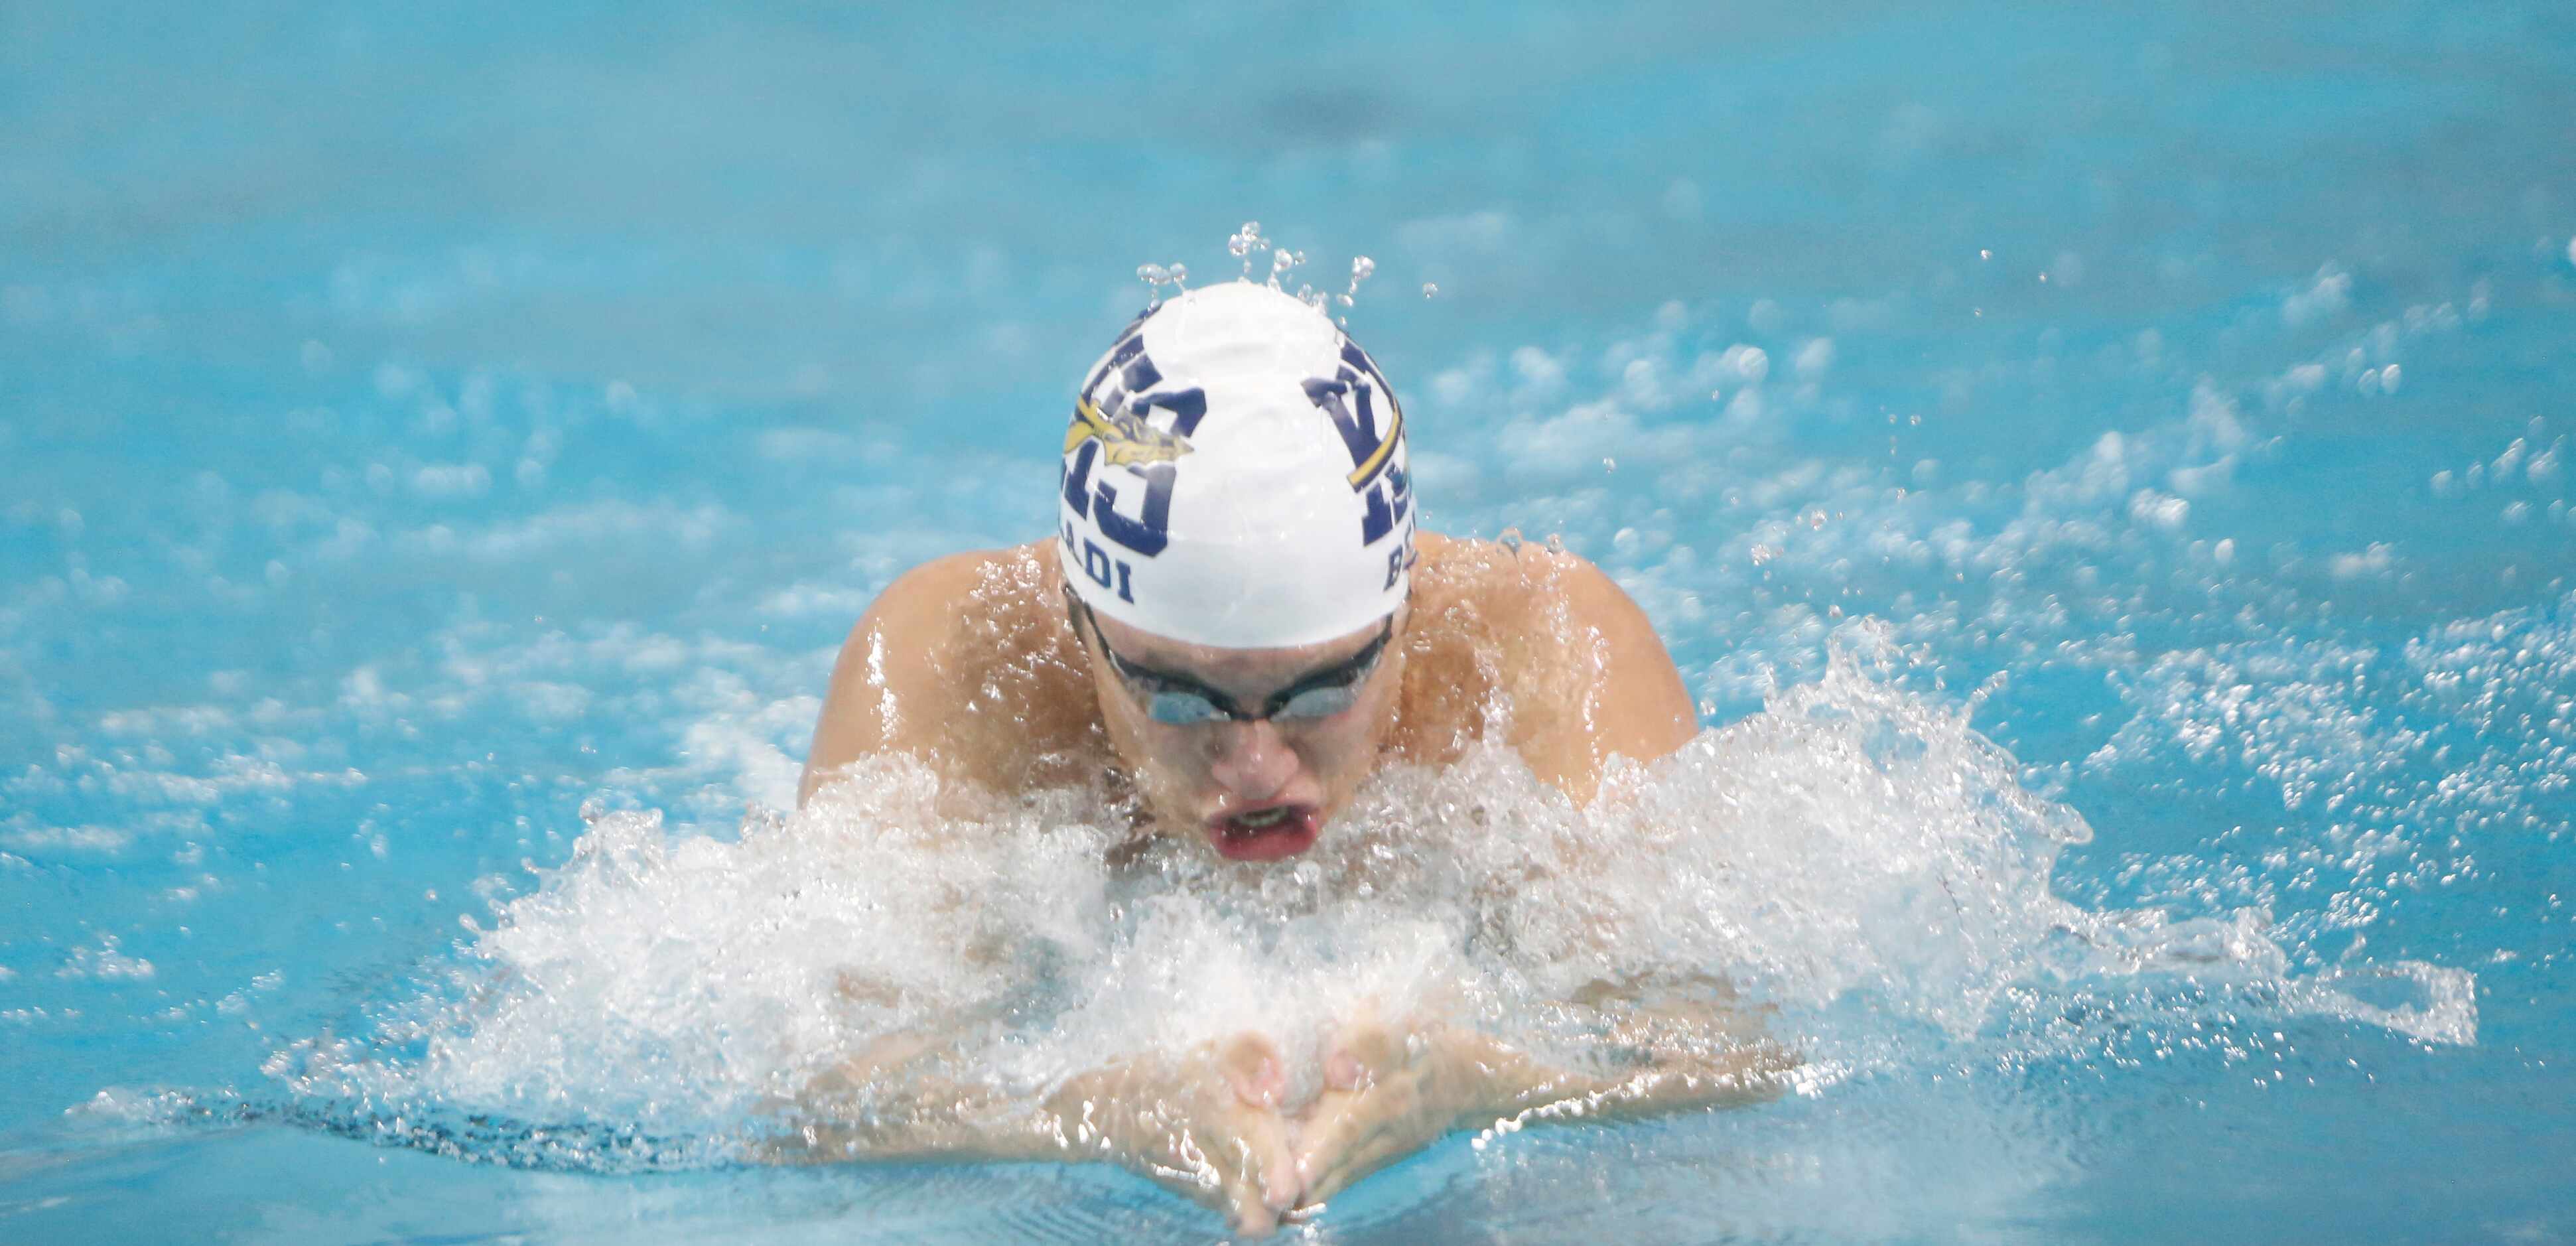 Keller swimmer Branden Beladi competes in the 6A Boys 100 Yard Breaststroke event. The first...